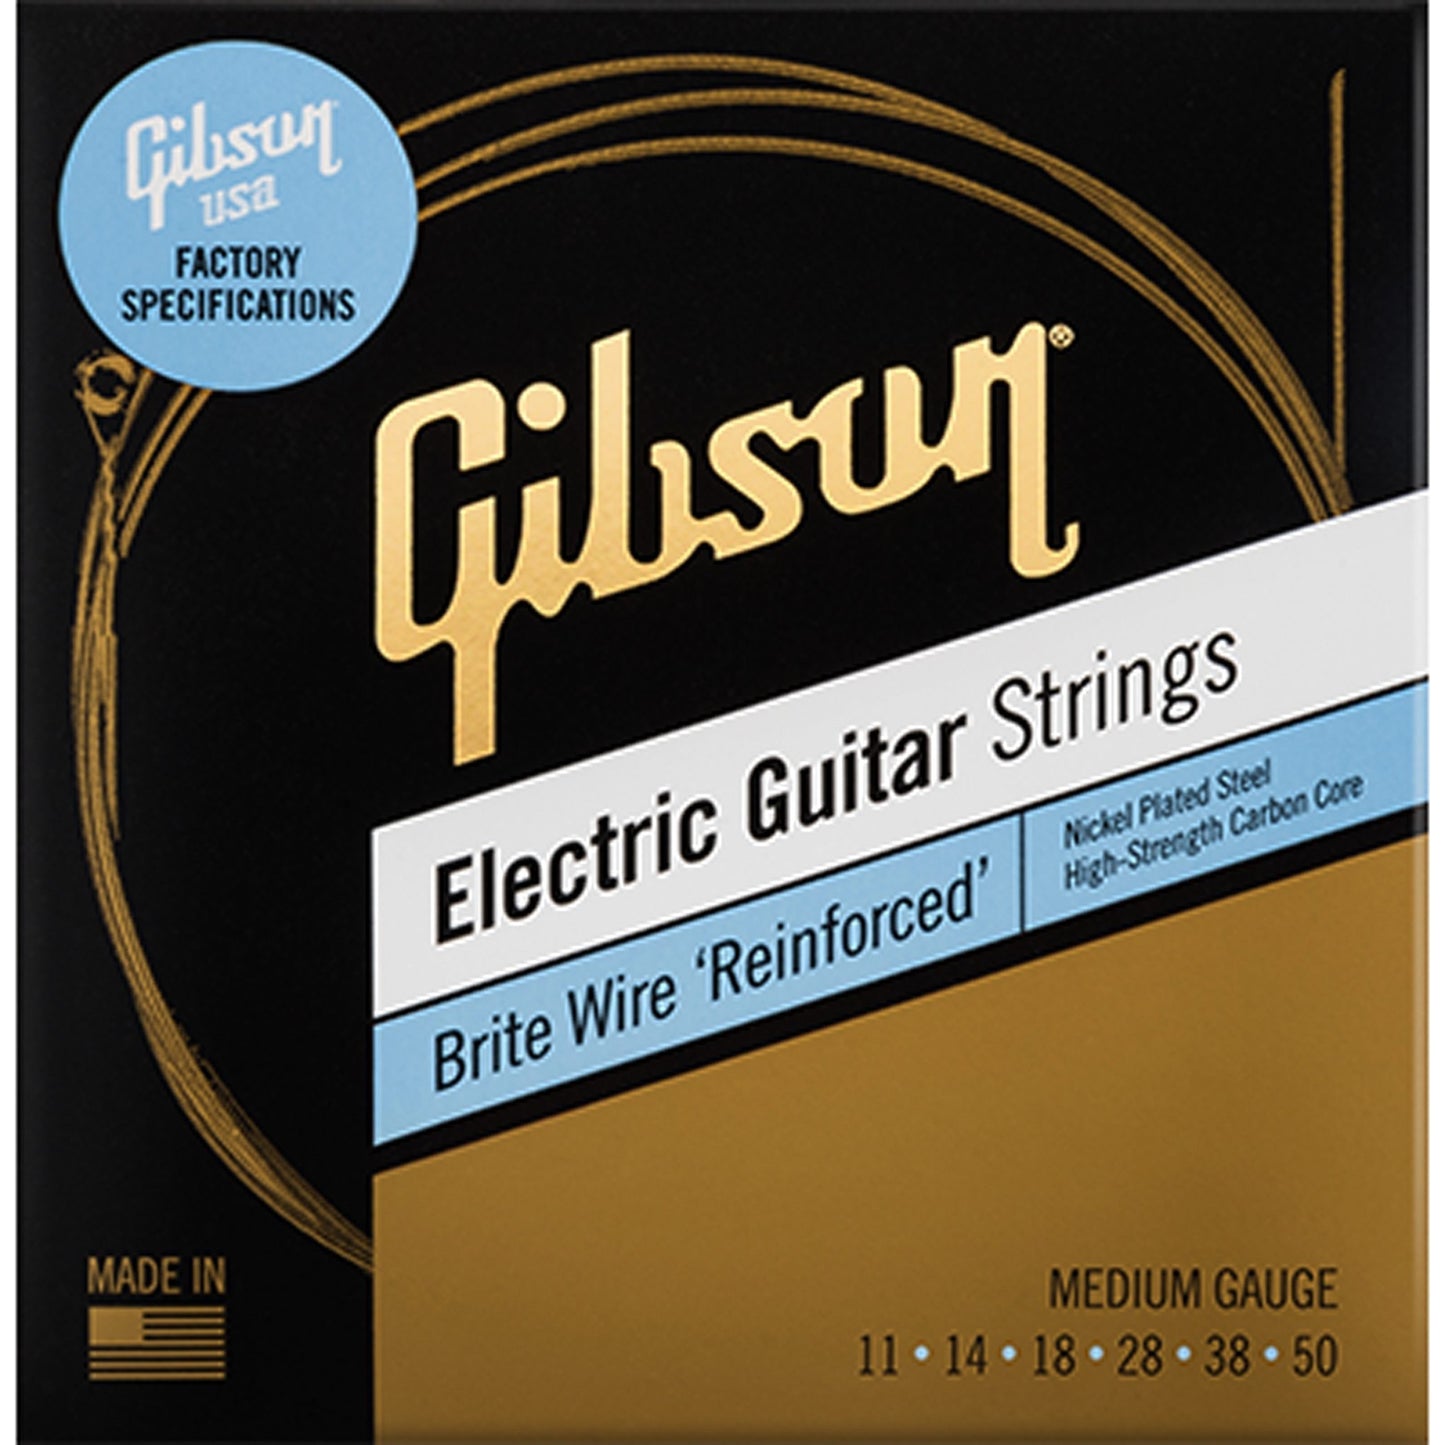 Gibson Brite Wire Reinforced Electric Guitar Strings, Medium